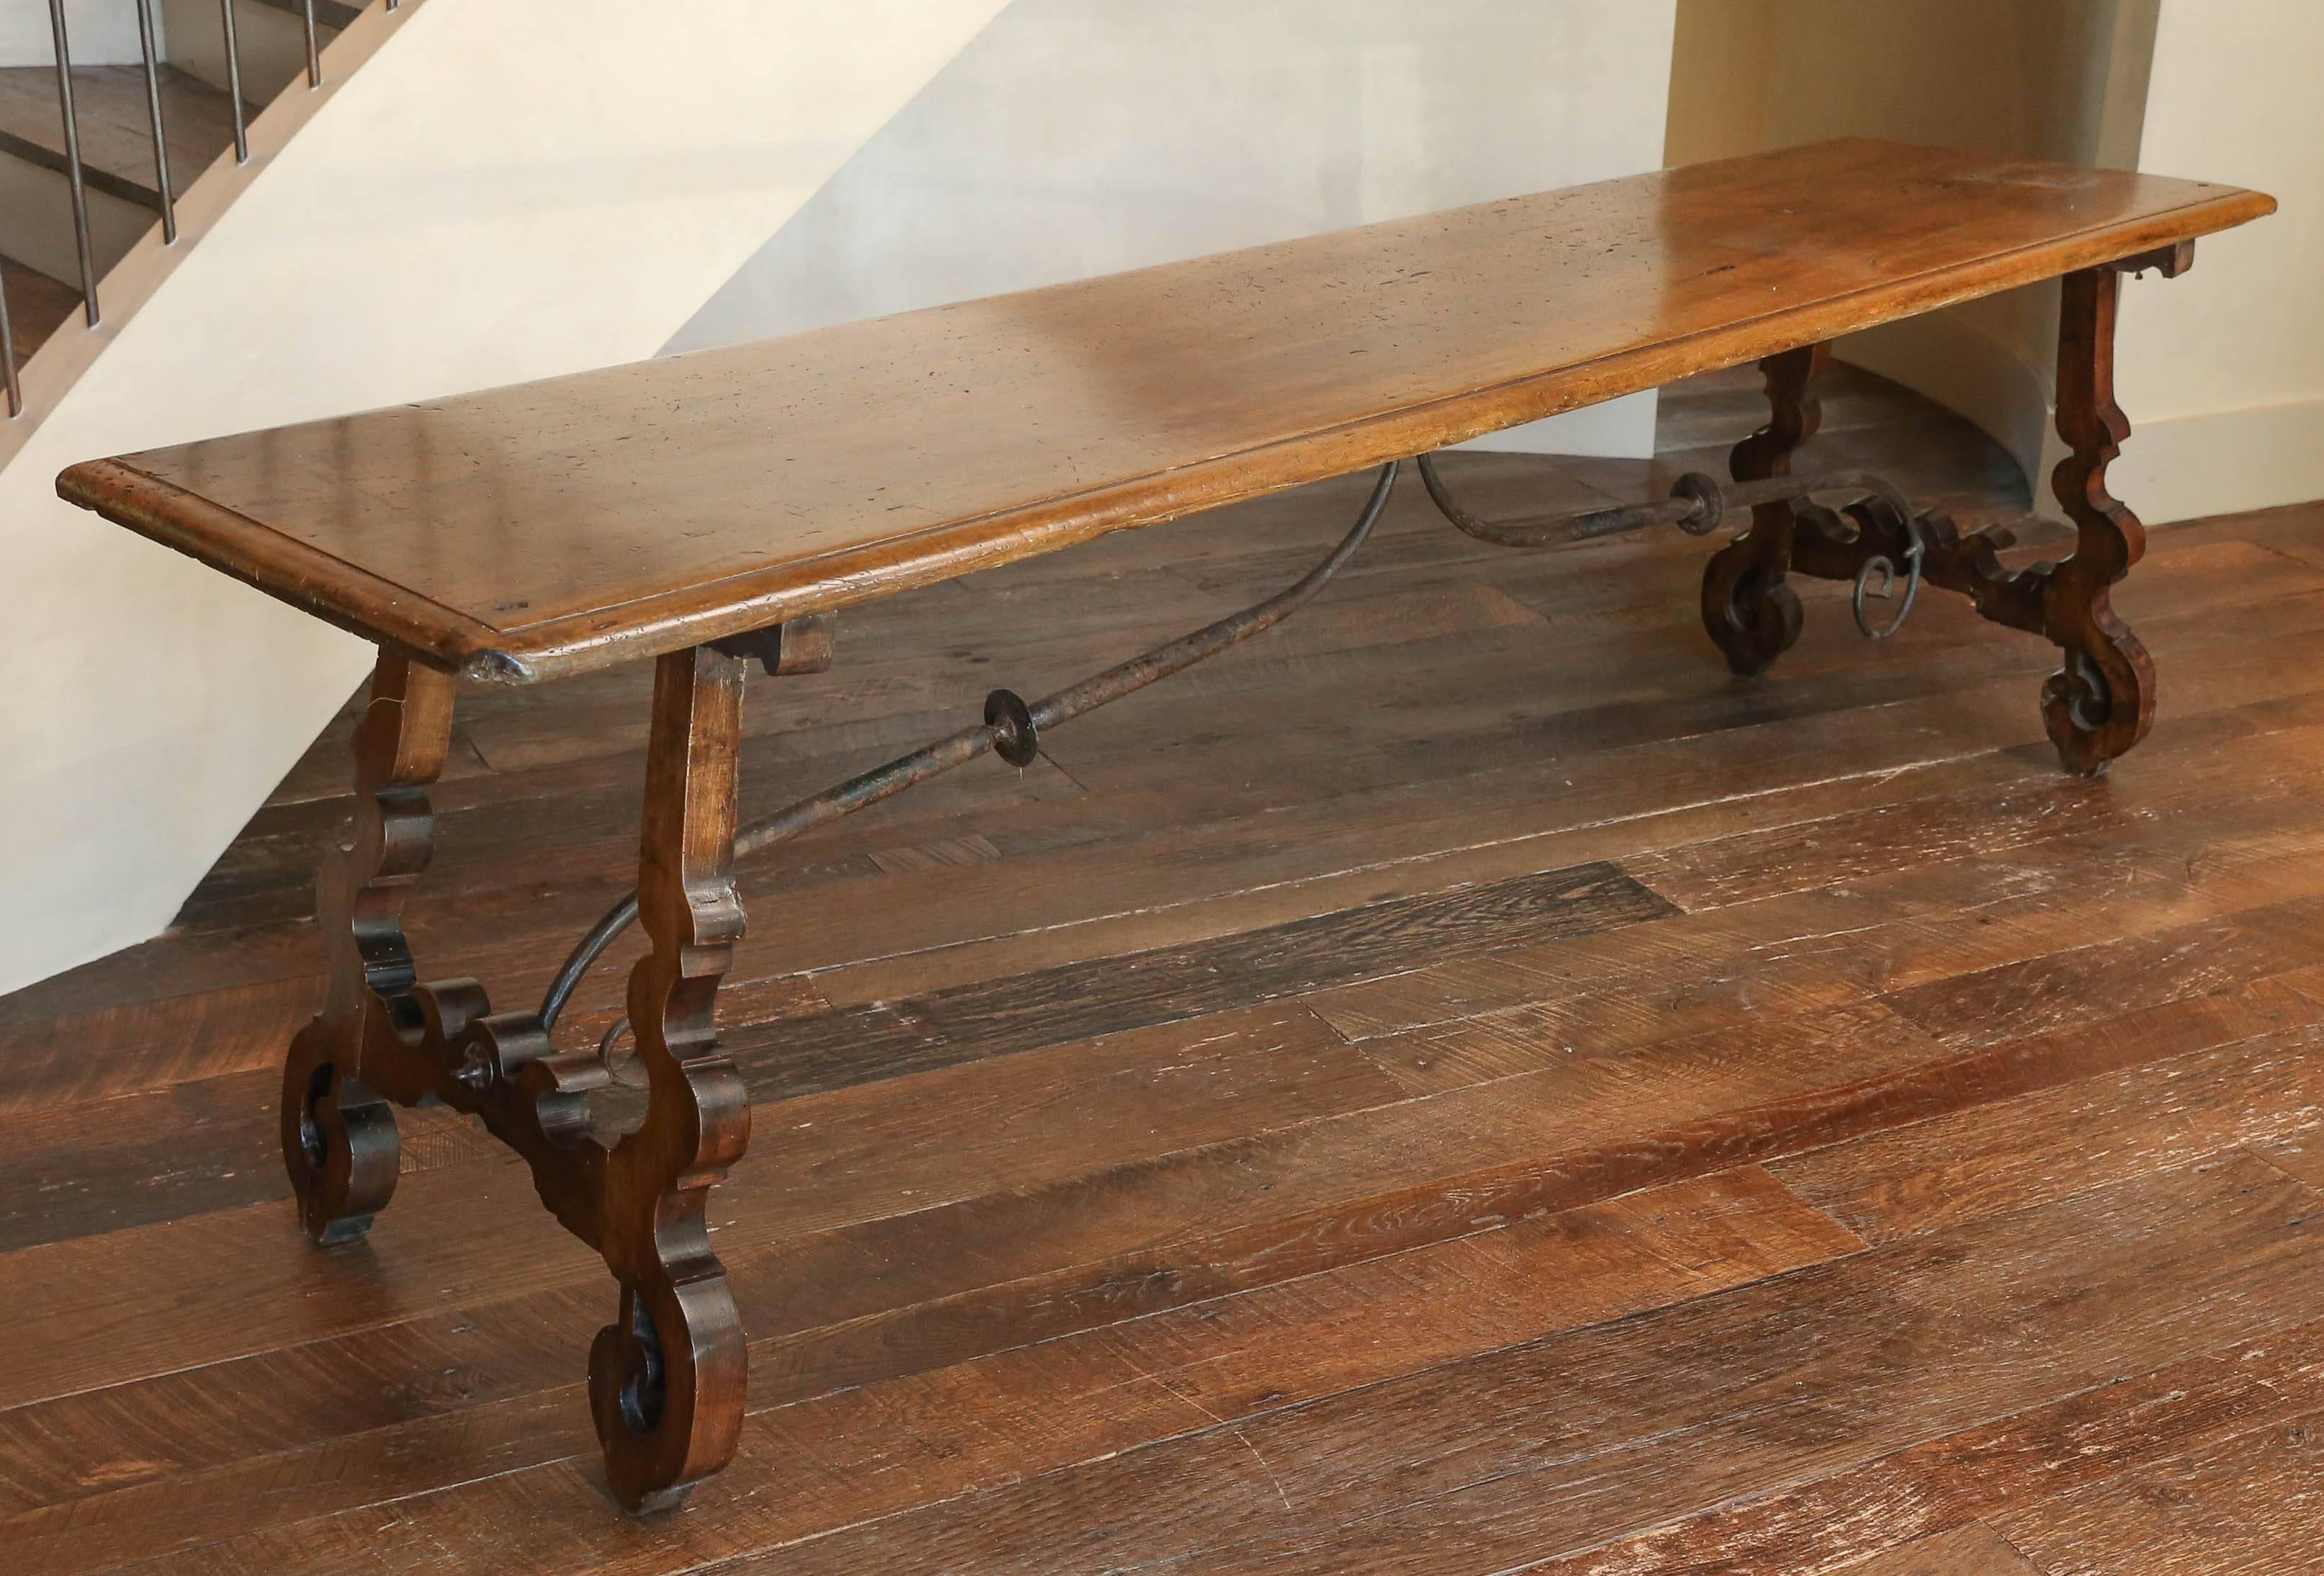 19th century Spanish single plank table with beautifully carved legs and hand-wrought stretchers. Spectacular patina.